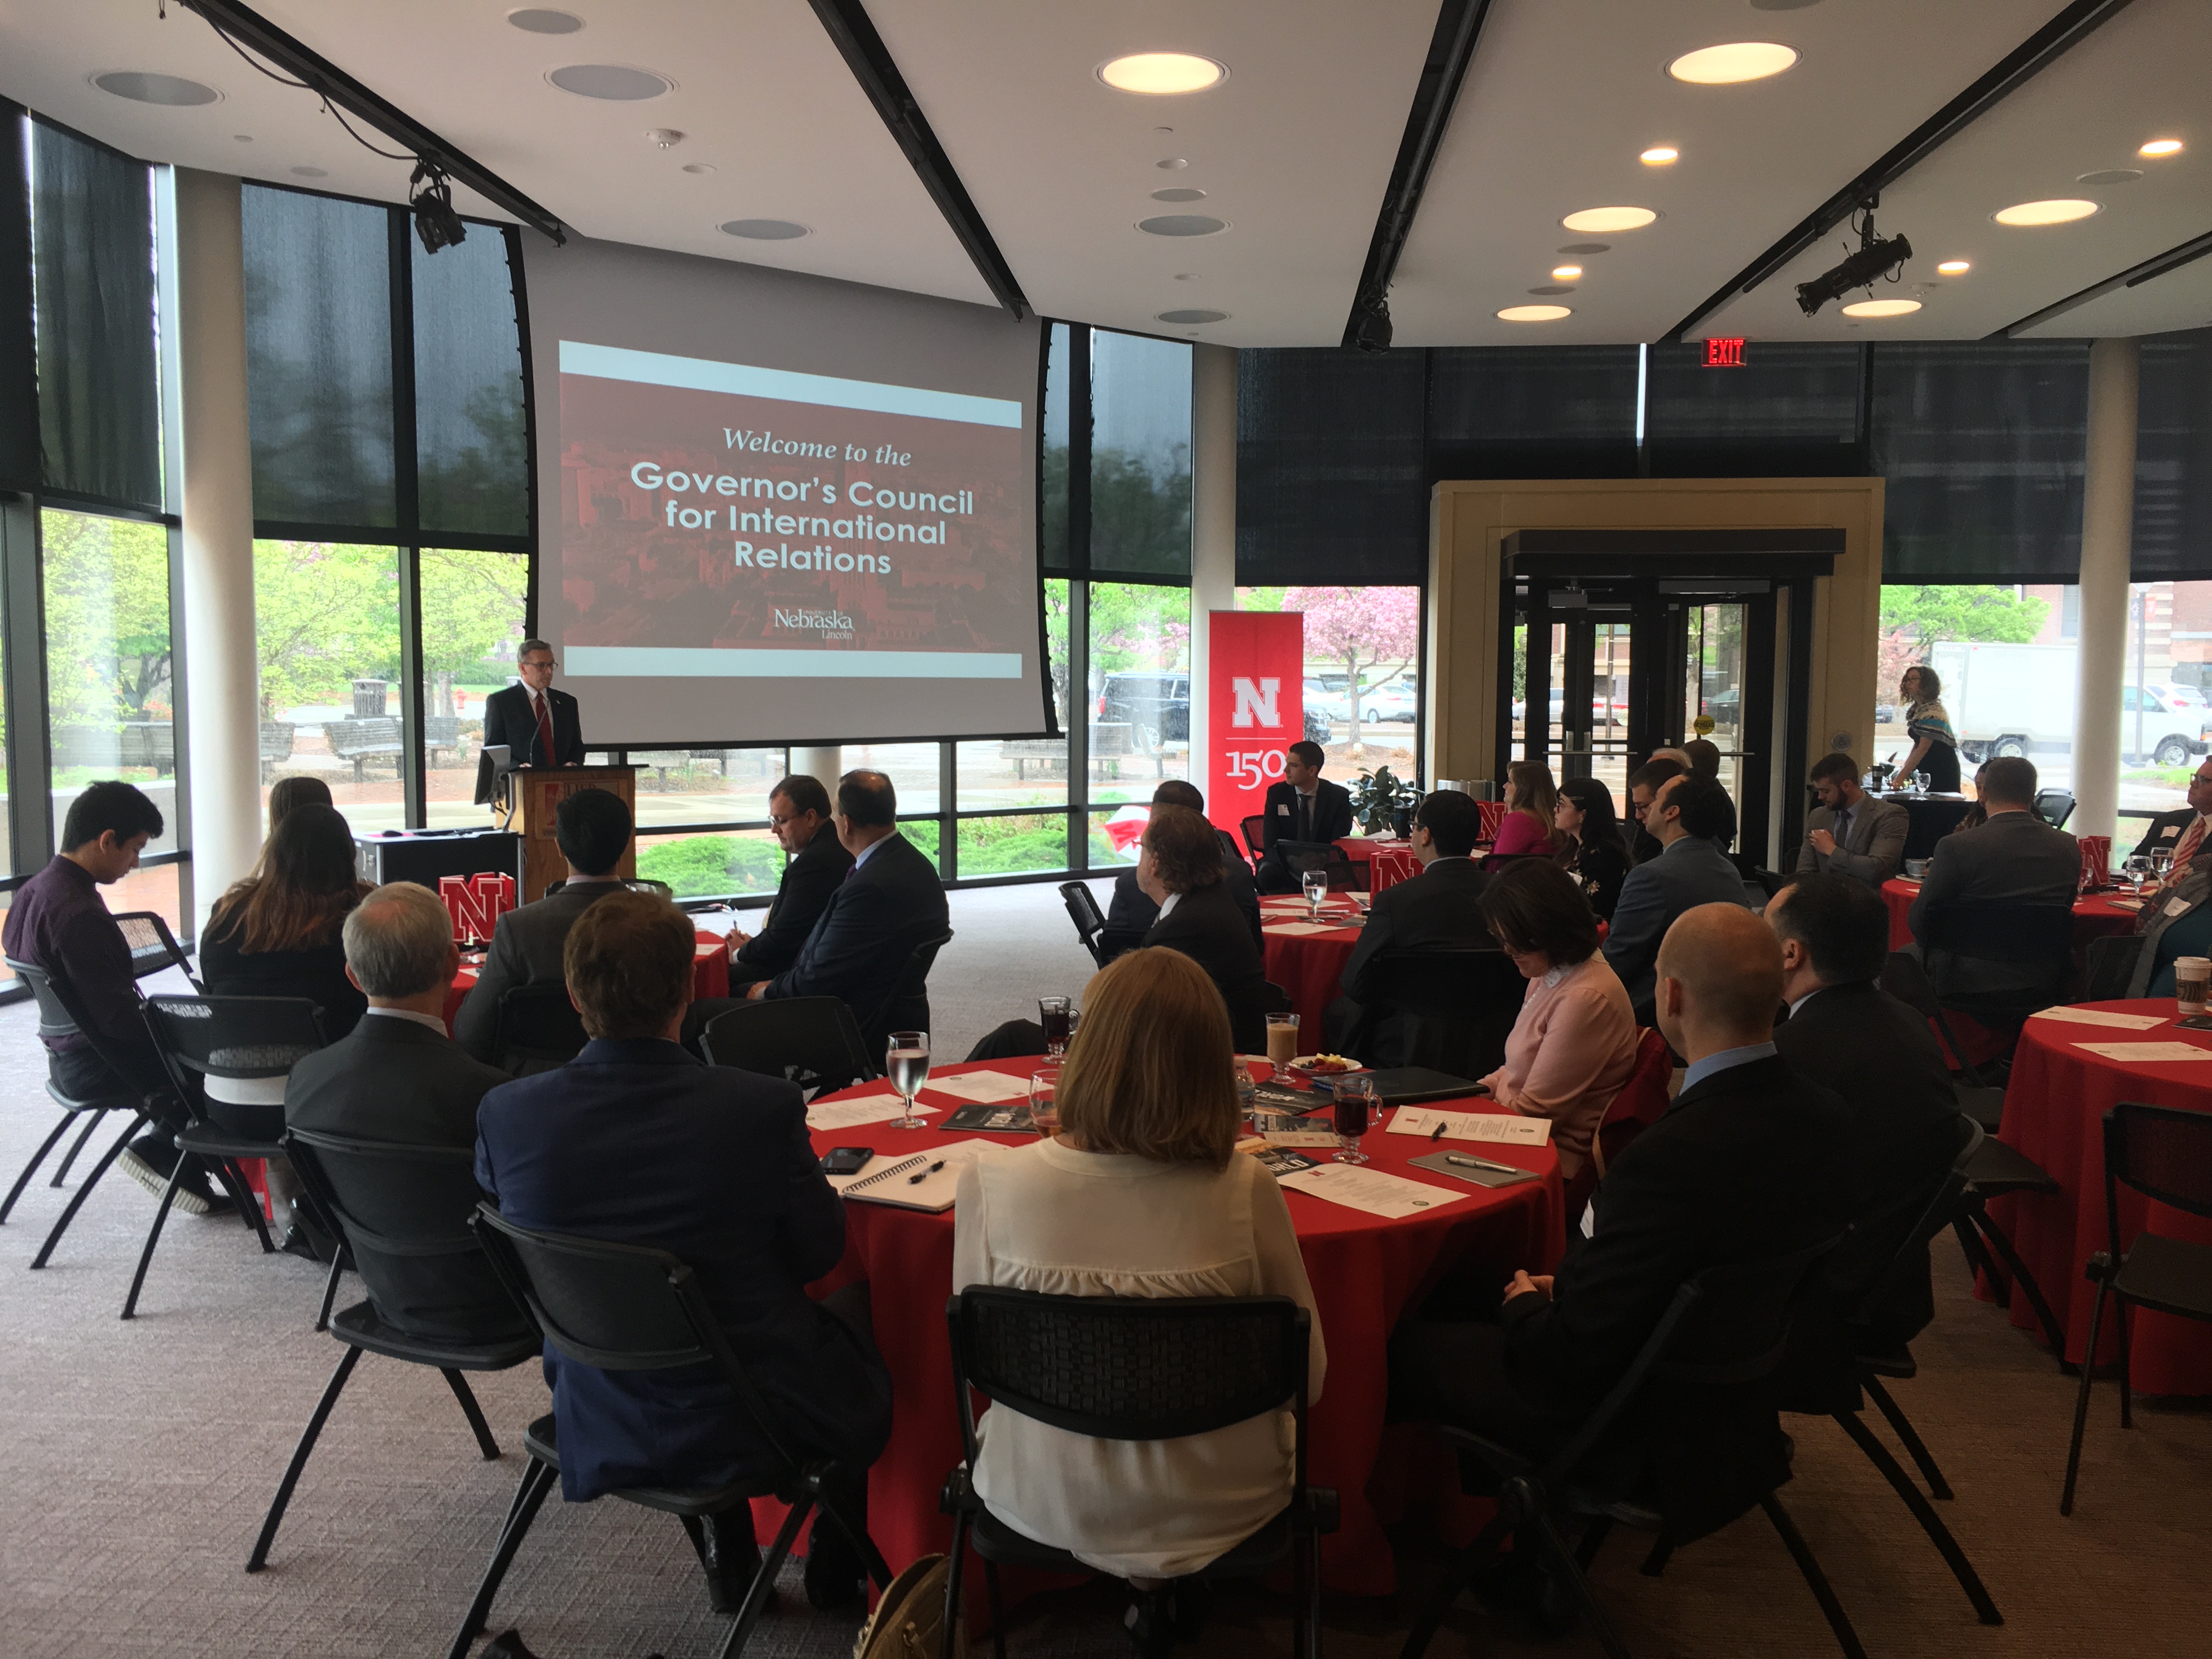 Chancellor Ronnie Green delivers opening remarks at the Governor’s Council for International Relations meeting hosted at the University of Nebraska-Lincoln.